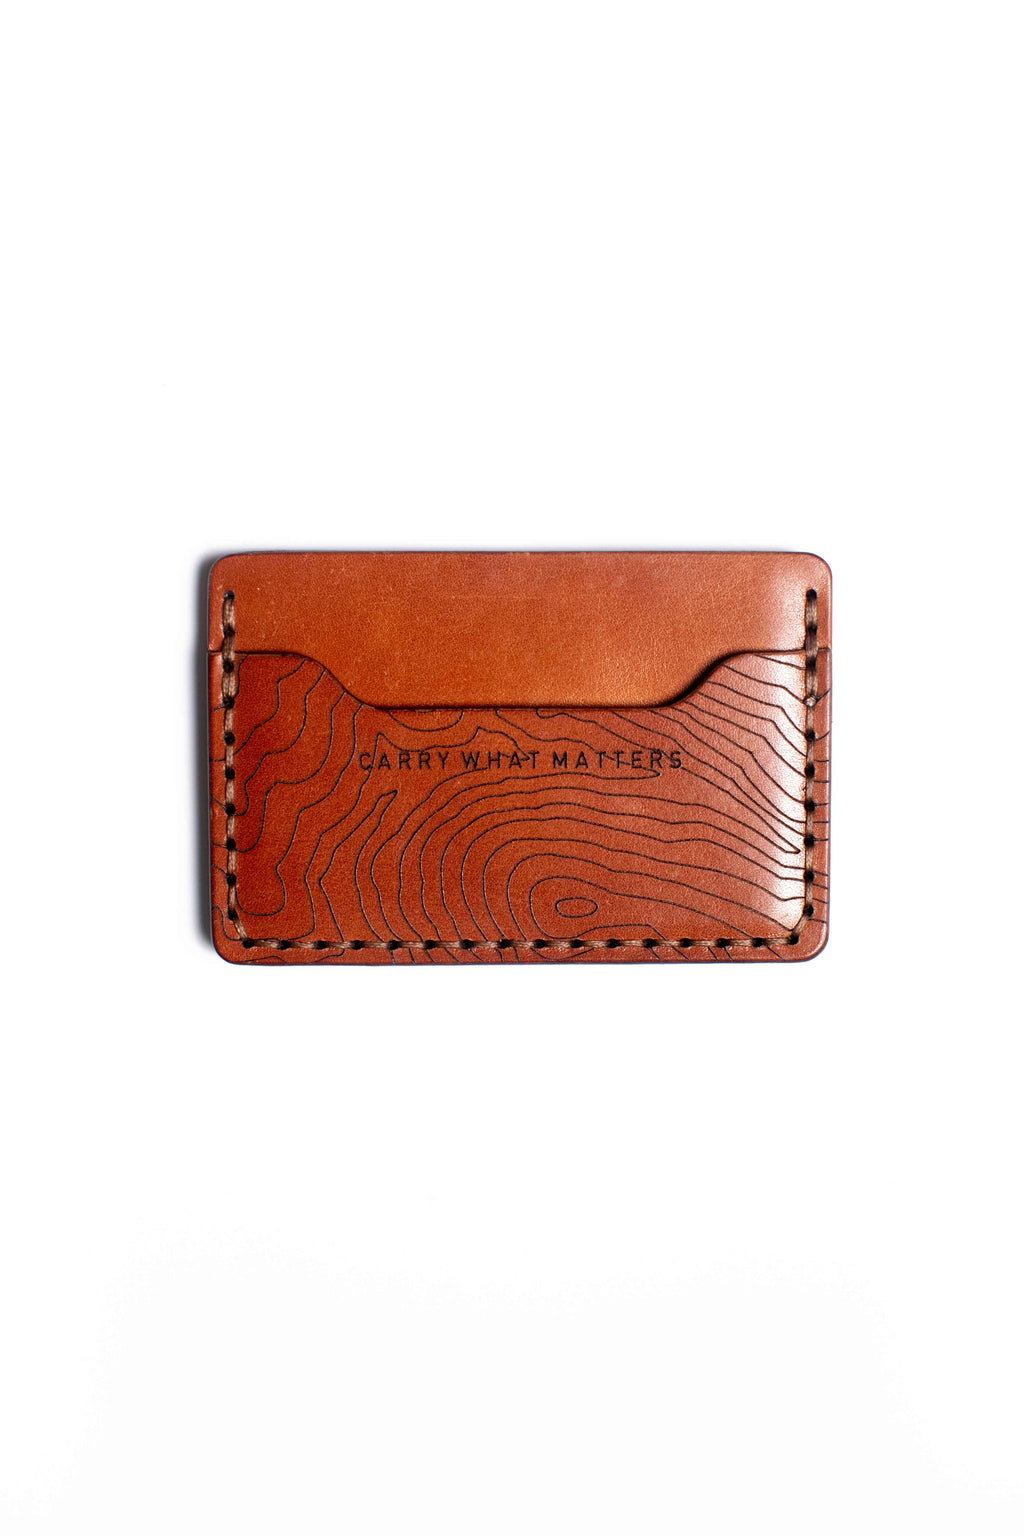 The Proper Slip – Wildflower Leather Co.